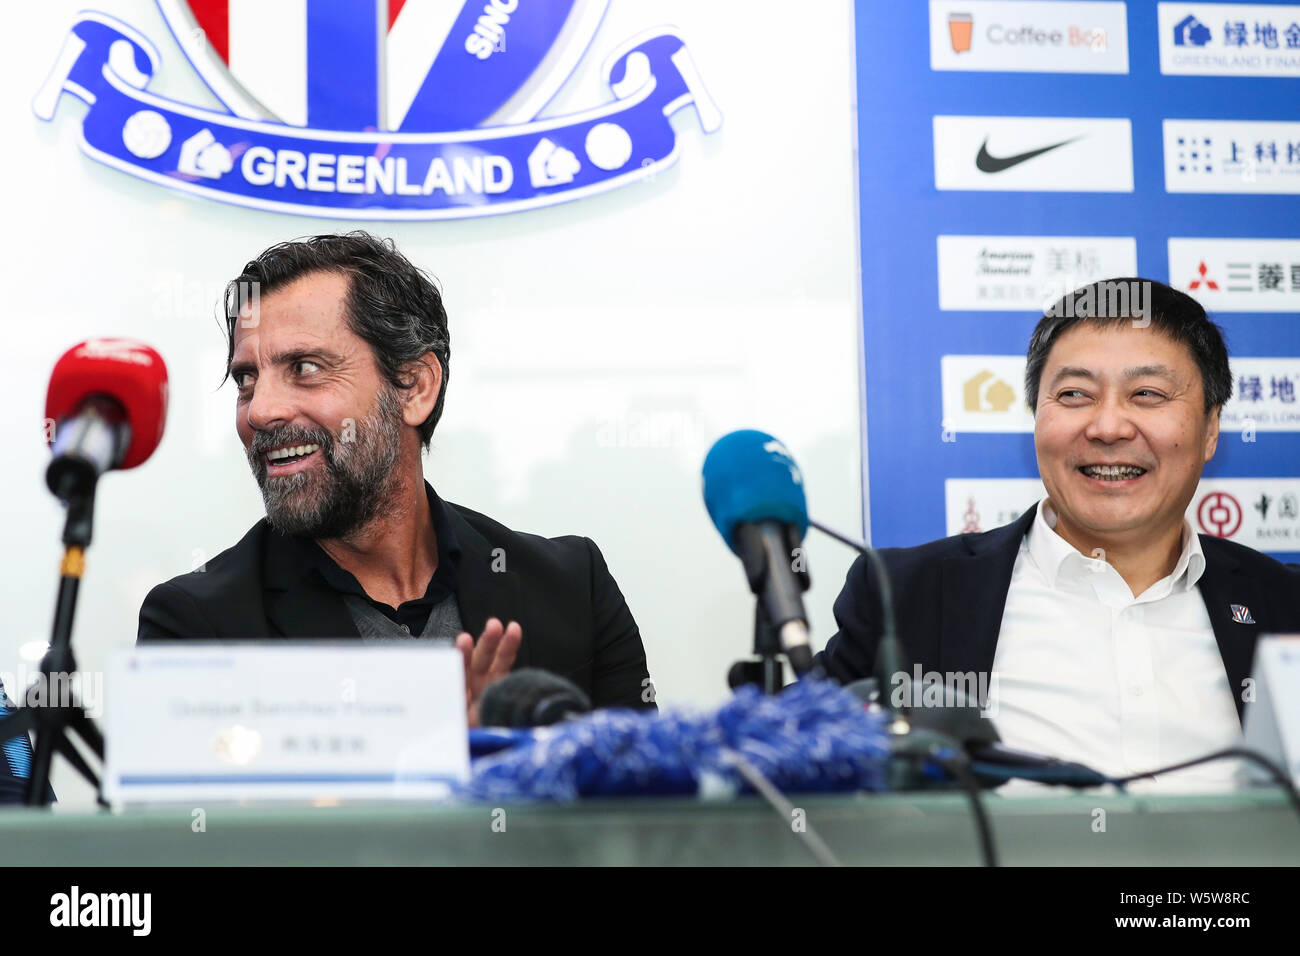 Spanish football manager Quique Sanchez Flores, left, the new head coach of Shanghai Greenland Shenhua FC, attends a press conference in Shanghai, Chi Stock Photo